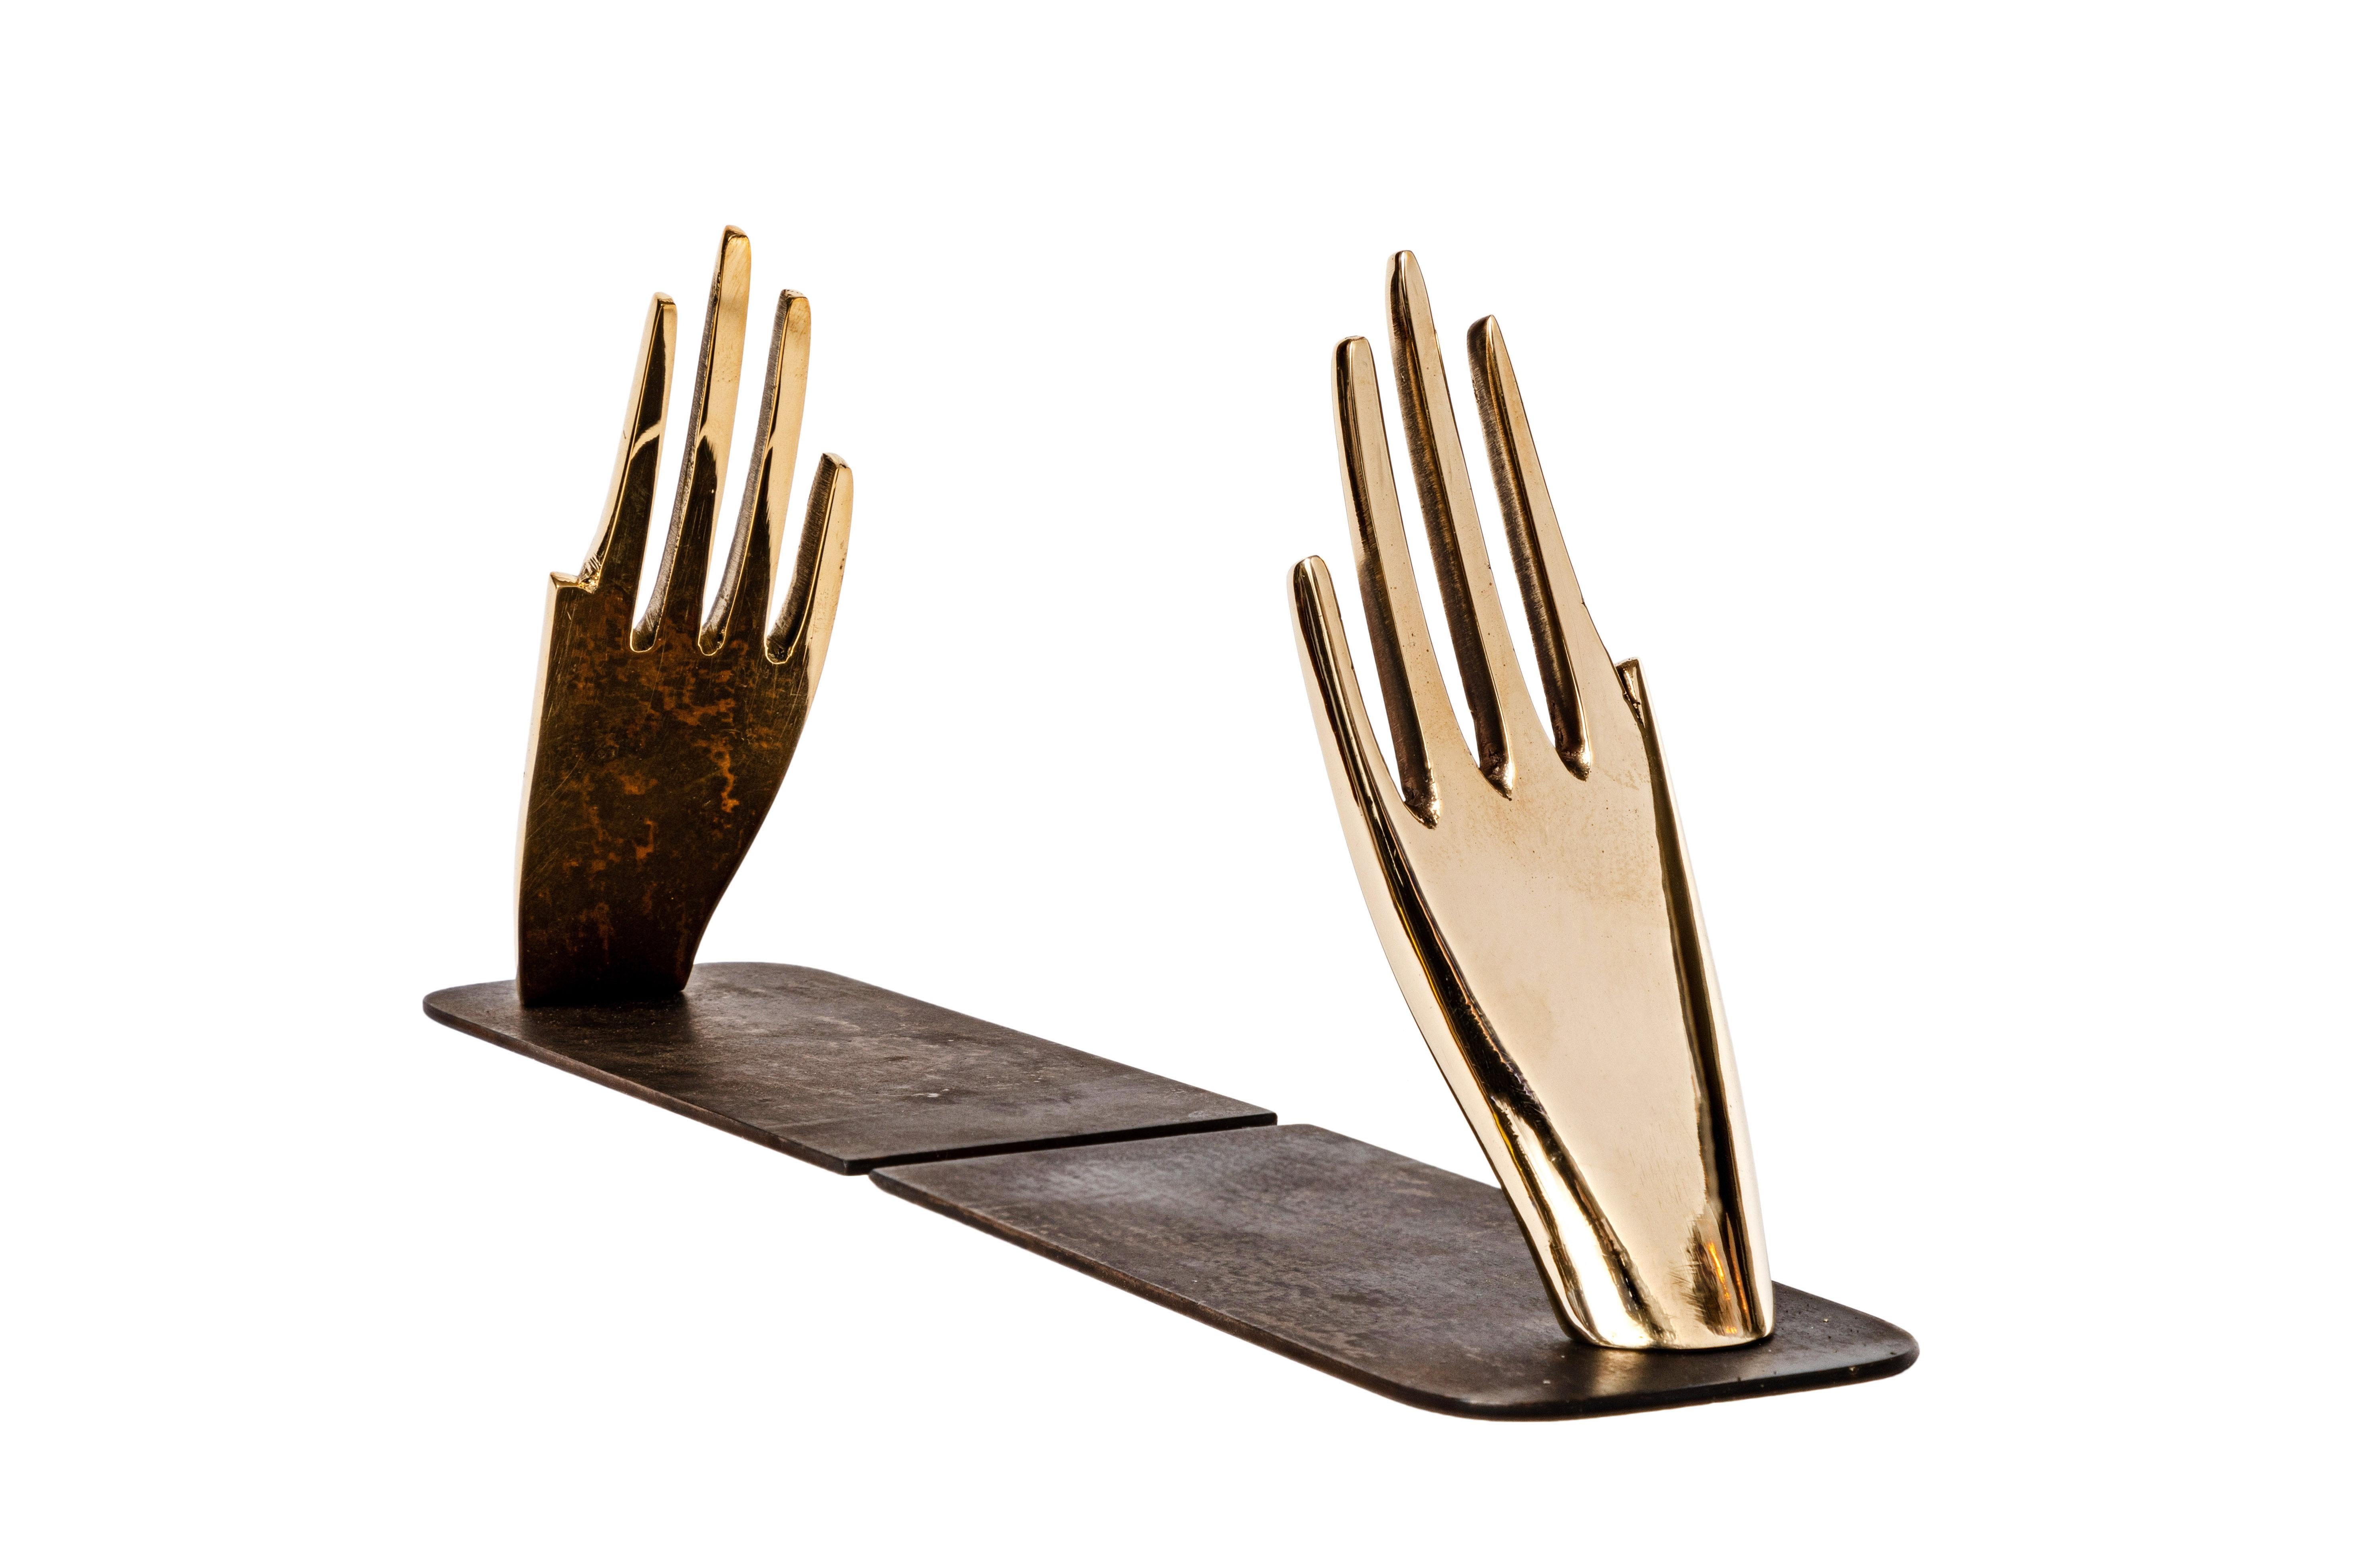 Pair of Carl Auböck model #1928 'Hands' brass bookends. Designed in the 1950s, this incredibly refined and sculptural pair of bookends are executed in patinated and polished brass.
Price is for the pair. One set in stock ready to ship. Available in